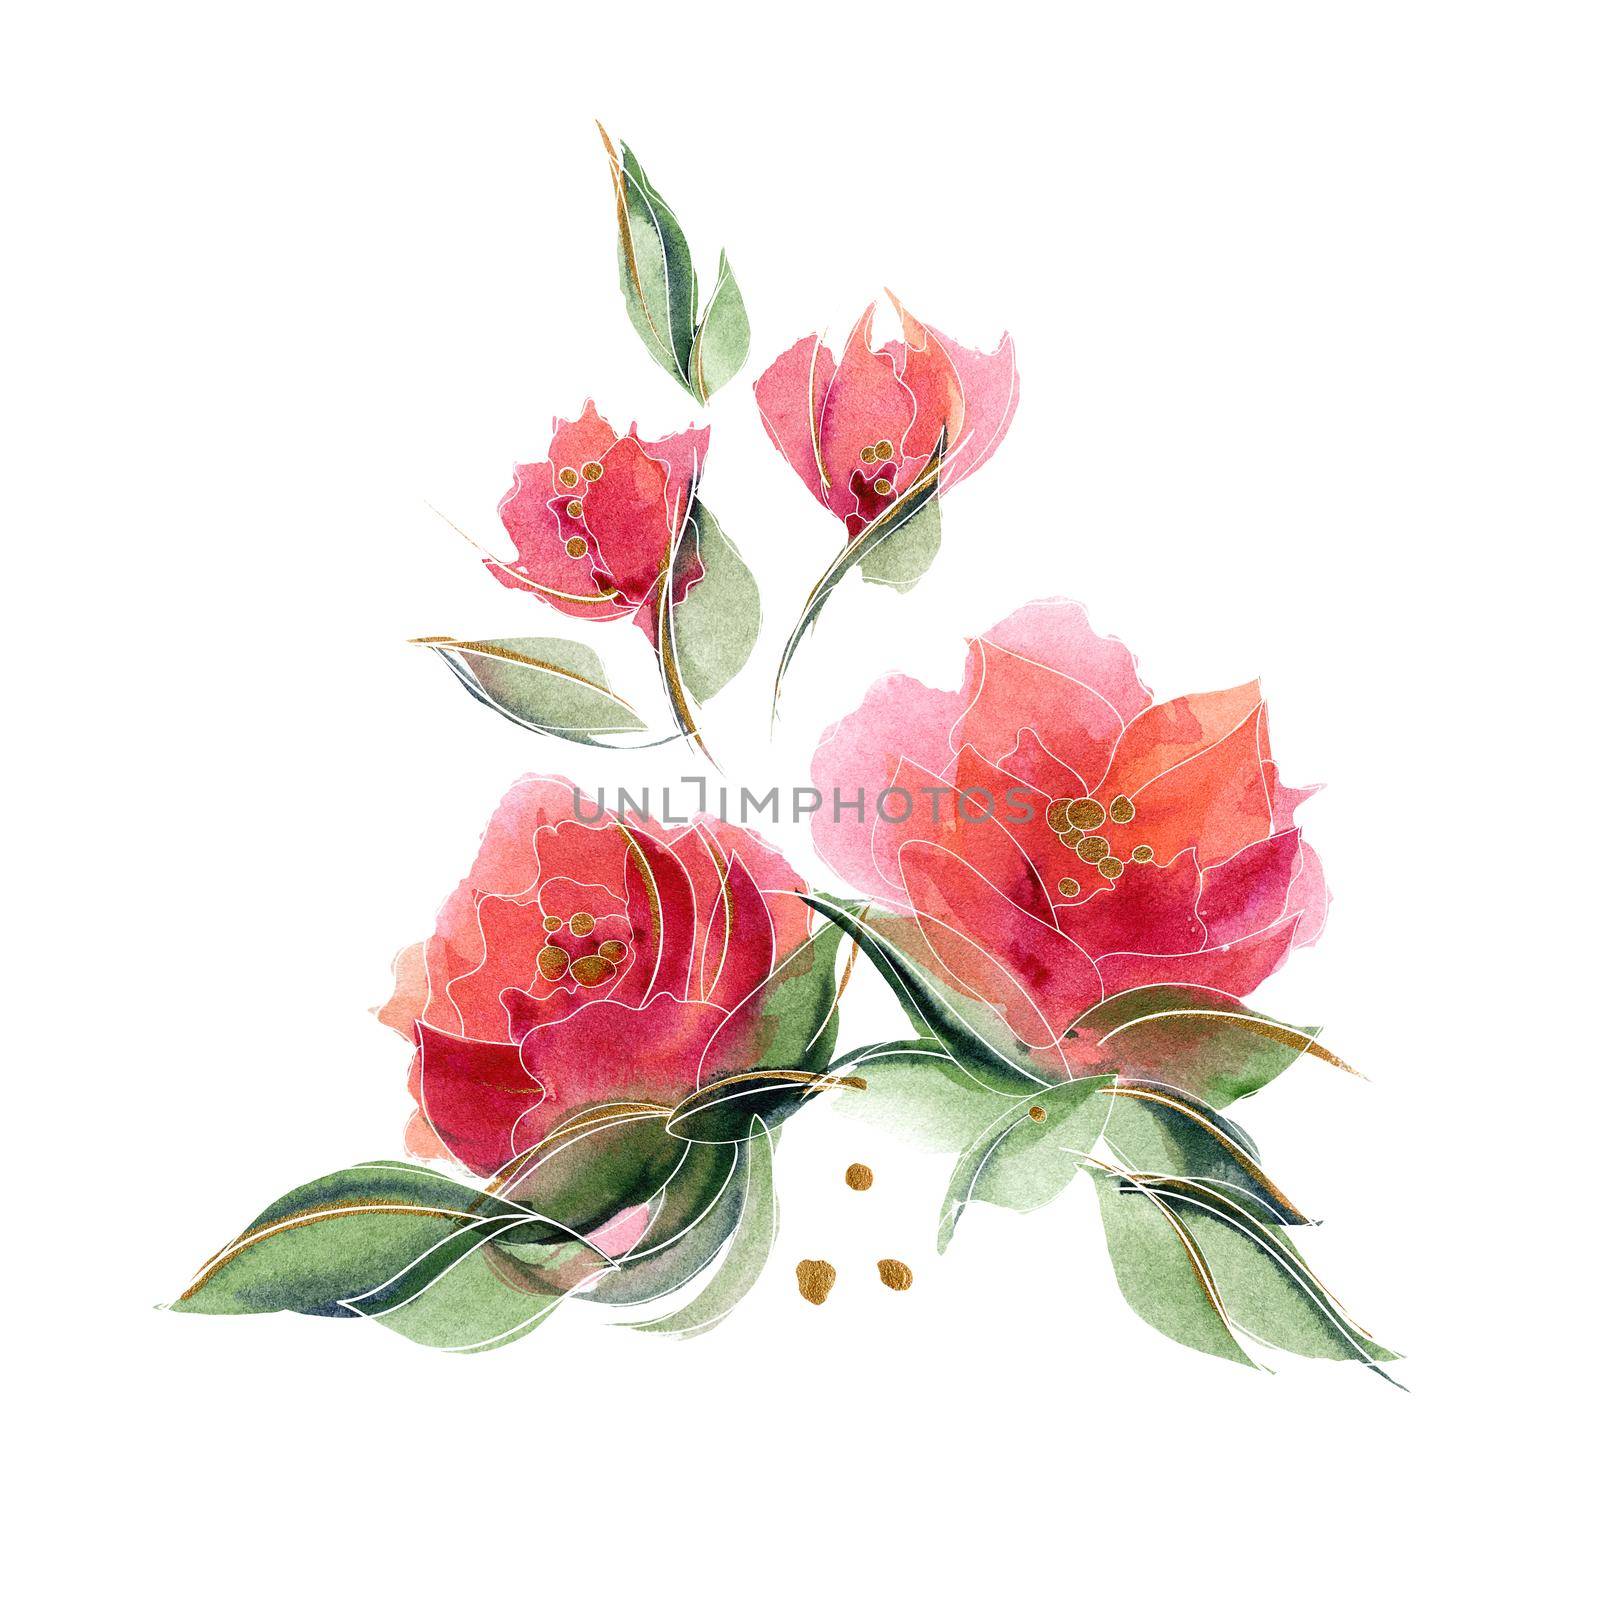 Pink floral composition with delicate fragrant rose flowers. Spring mood with nature ditsy bouquet